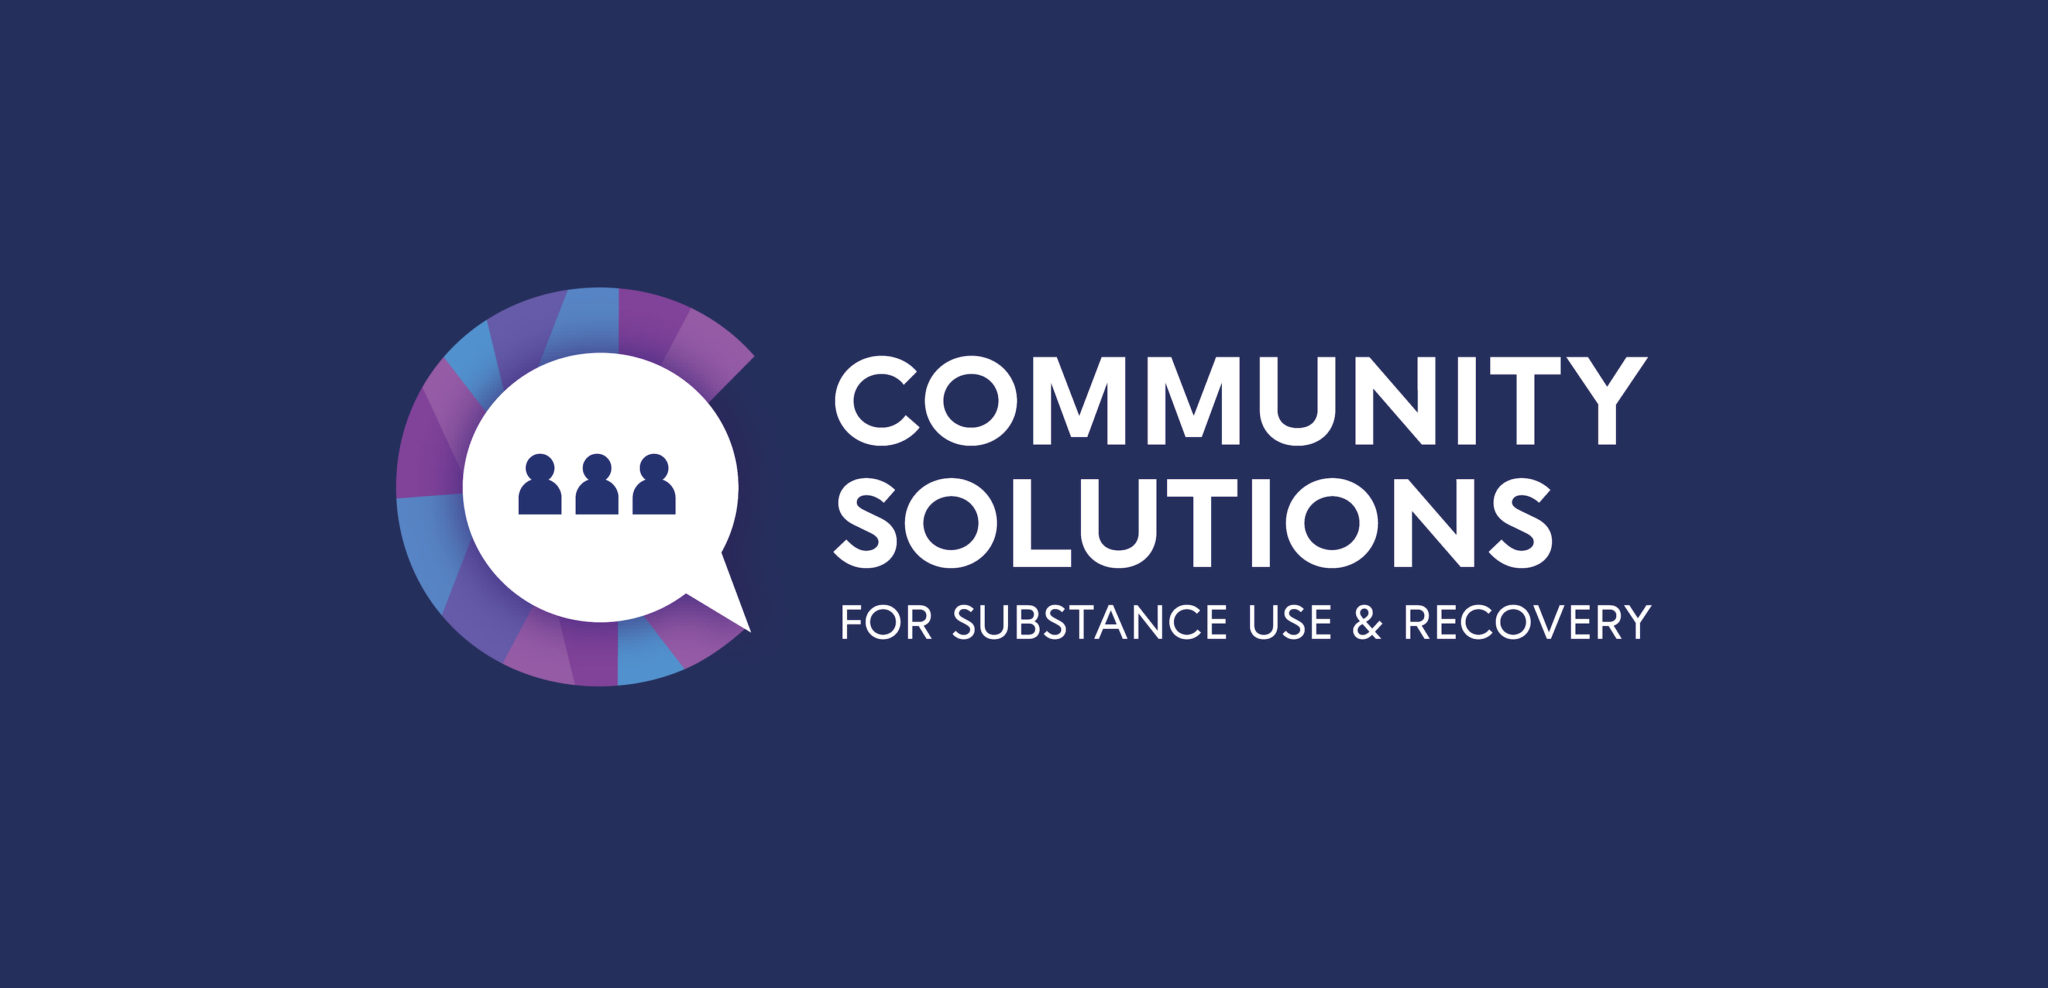 Community Solutions for Substance Use & Recovery branding, created by Šek Design Studio